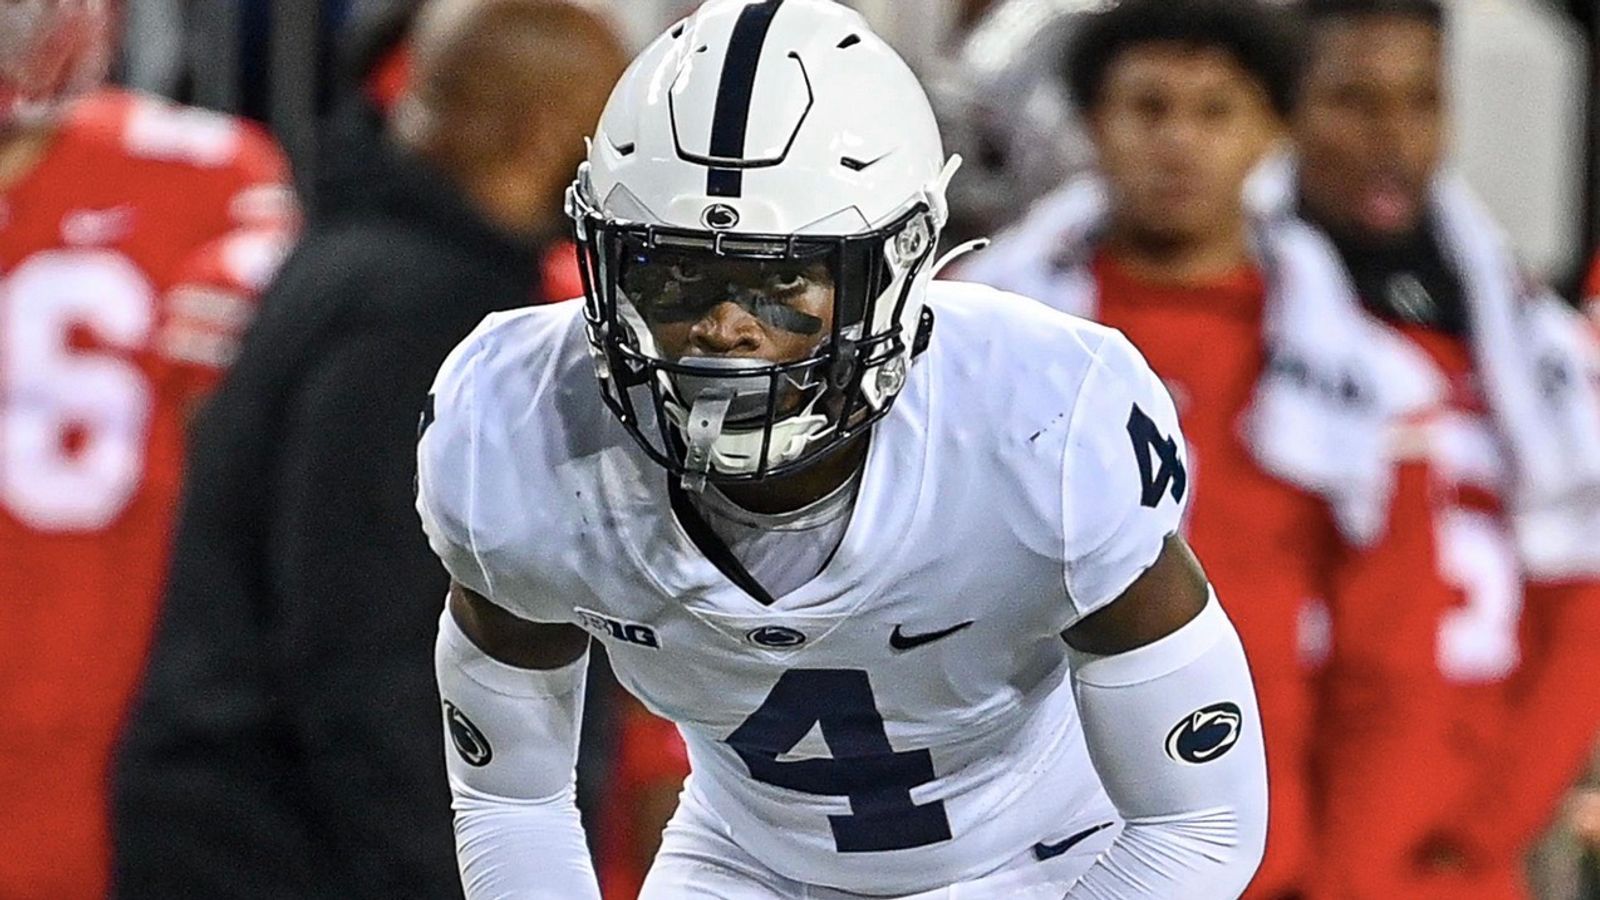 Did Penn State mislead fans about bowl game and opt-outs?